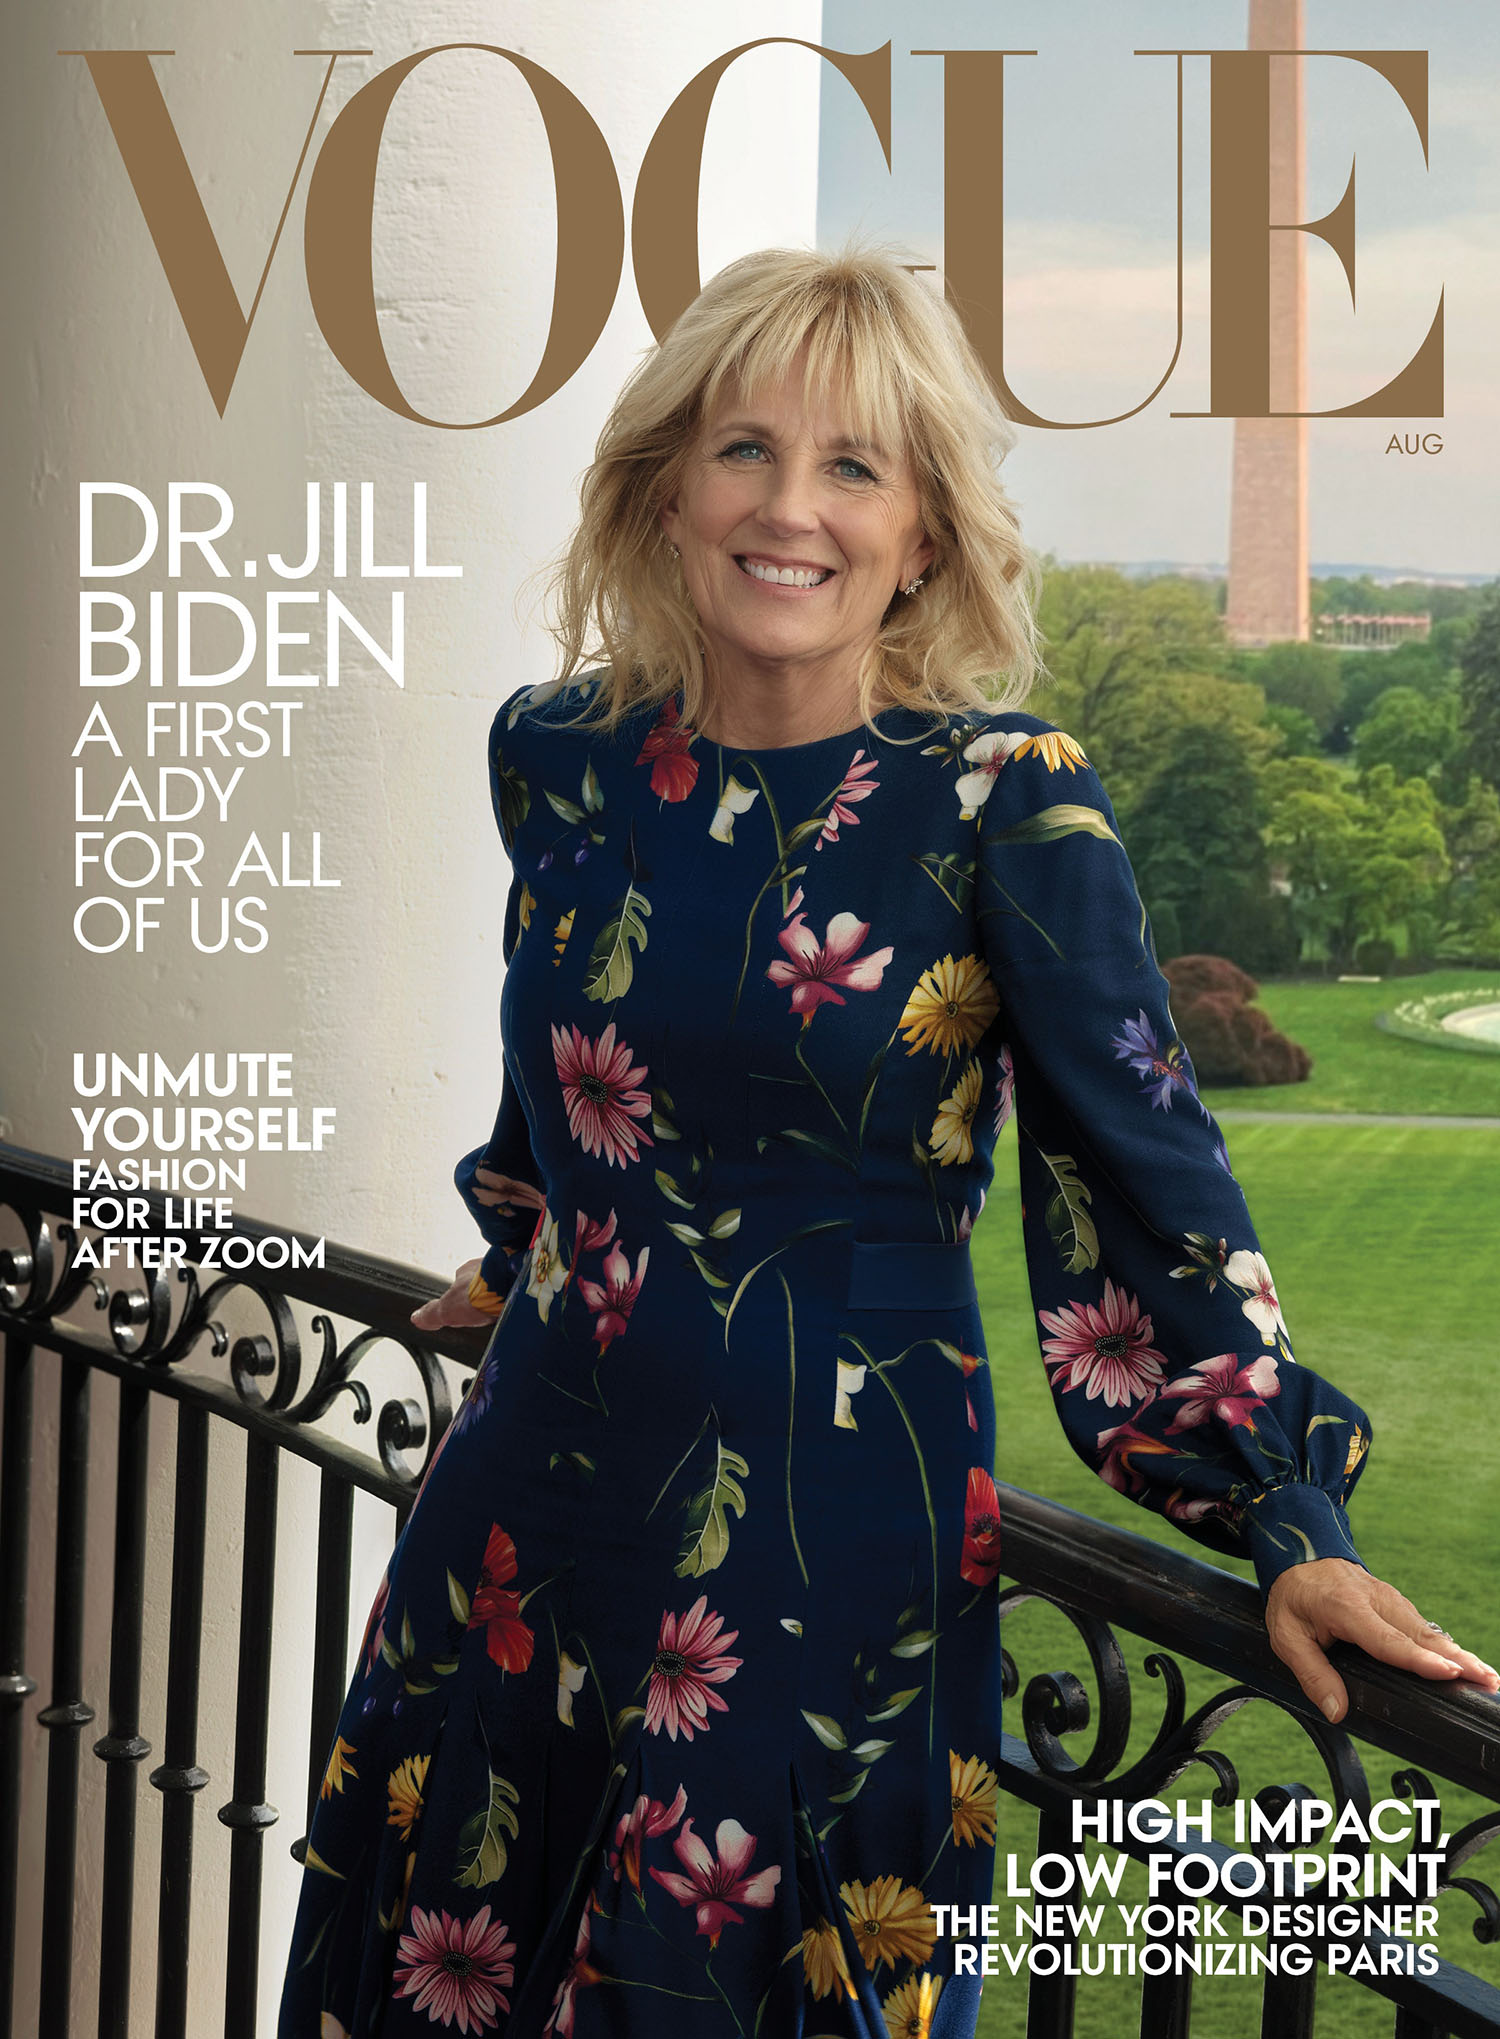 First Lady Dr. Jill Biden covers Vogue US August 2021 by Annie Leibovitz